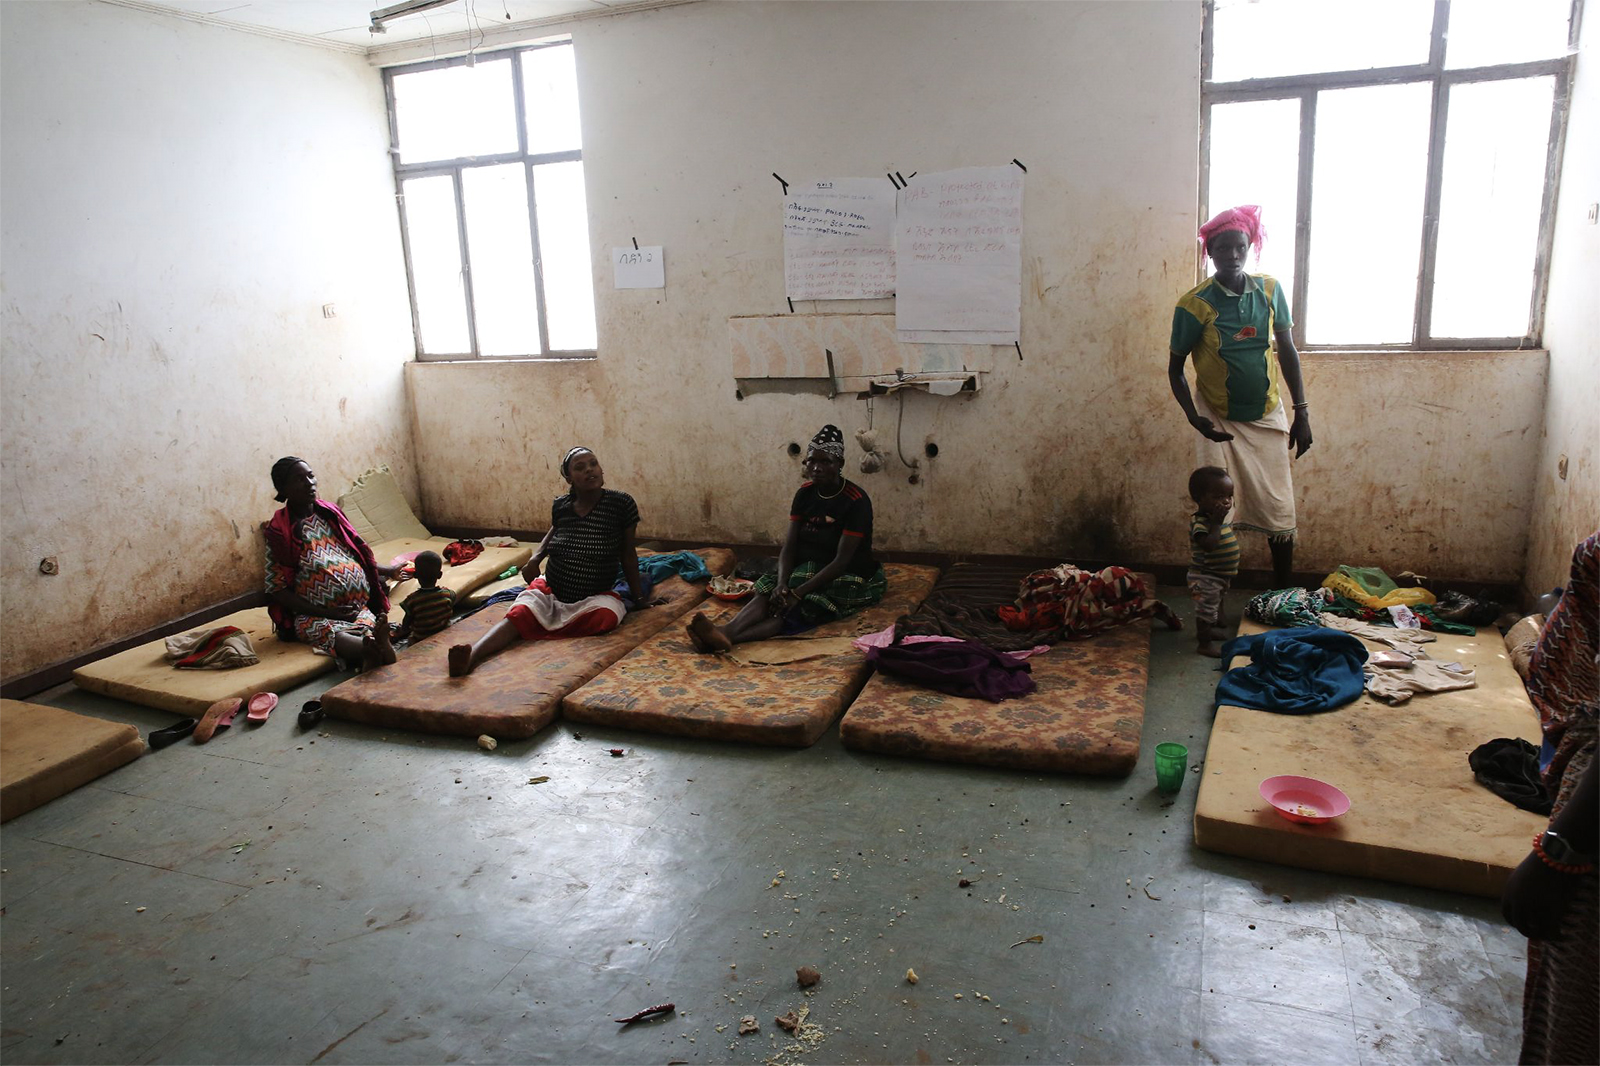 Pregnant women wait for labor to begin at a healthcare center in Ethiopia. Many facilities like this in underdeveloped countries lack clean water. (Photo by Haik Kocharian for Village Health Partnership)